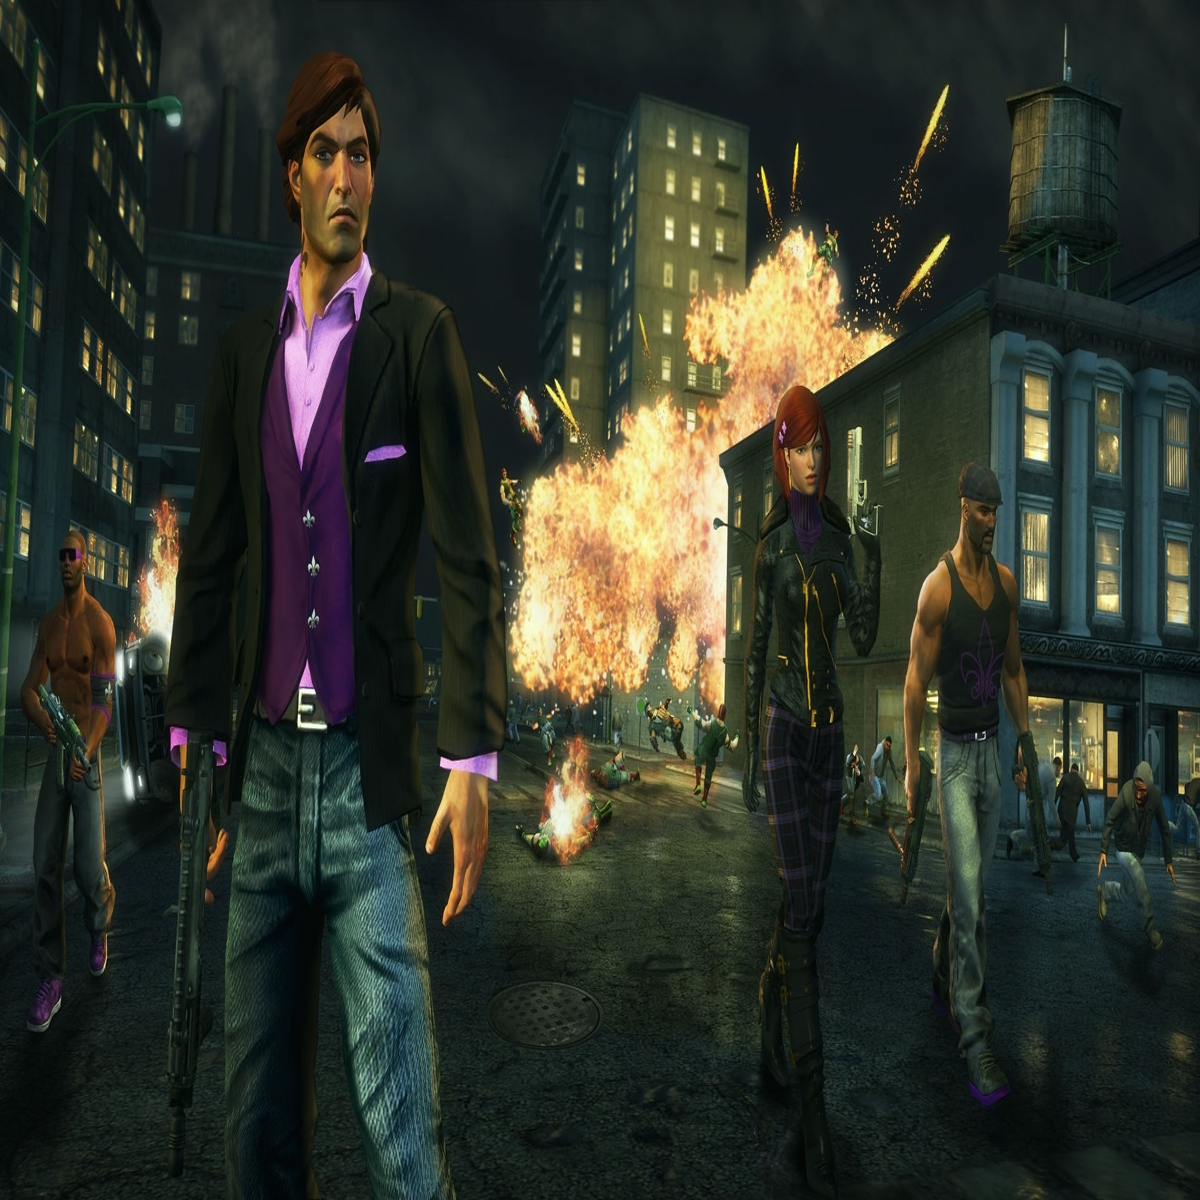 Saints Row: The Third Remastered - Official Announcement Trailer 